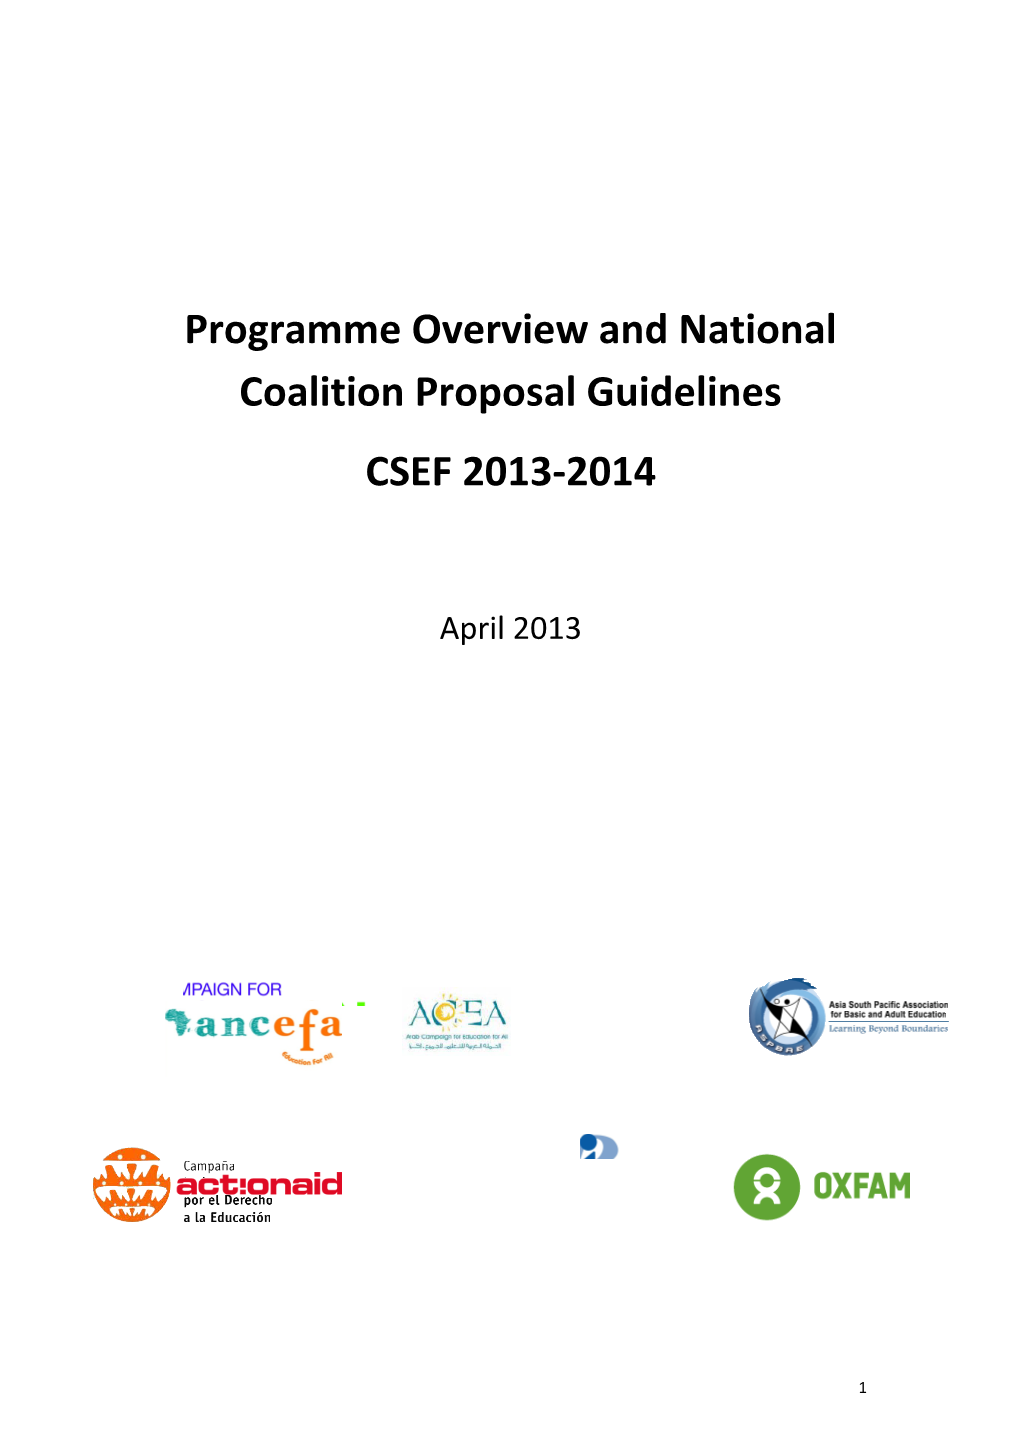 Programme Overview and National Coalition Proposal Guidelines